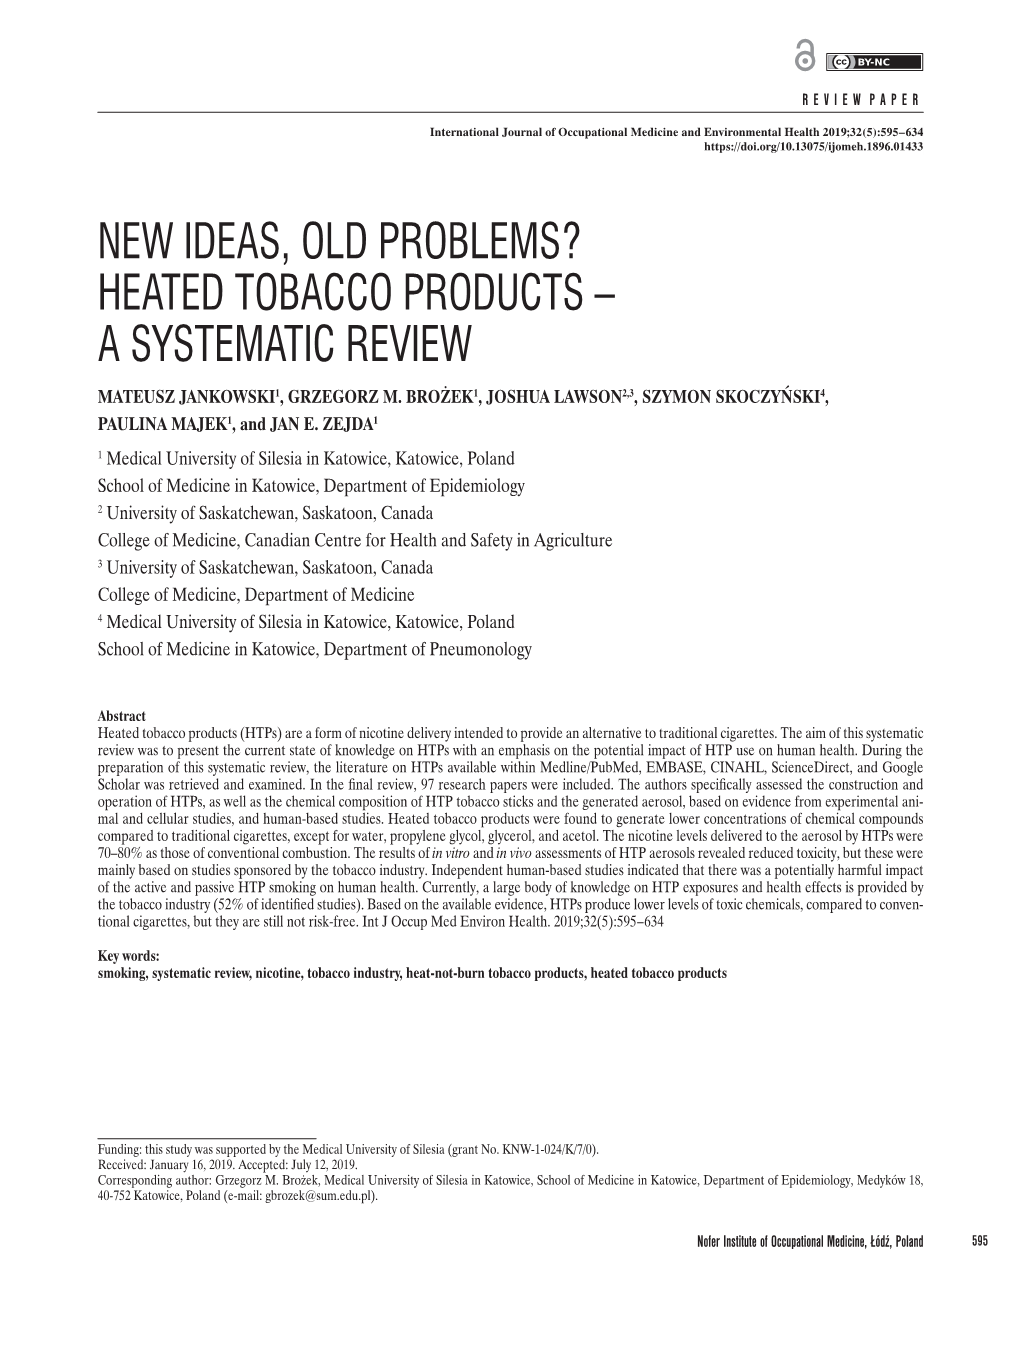 New Ideas, Old Problems? Heated Tobacco Products – a Systematic Review Mateusz Jankowski1, Grzegorz M